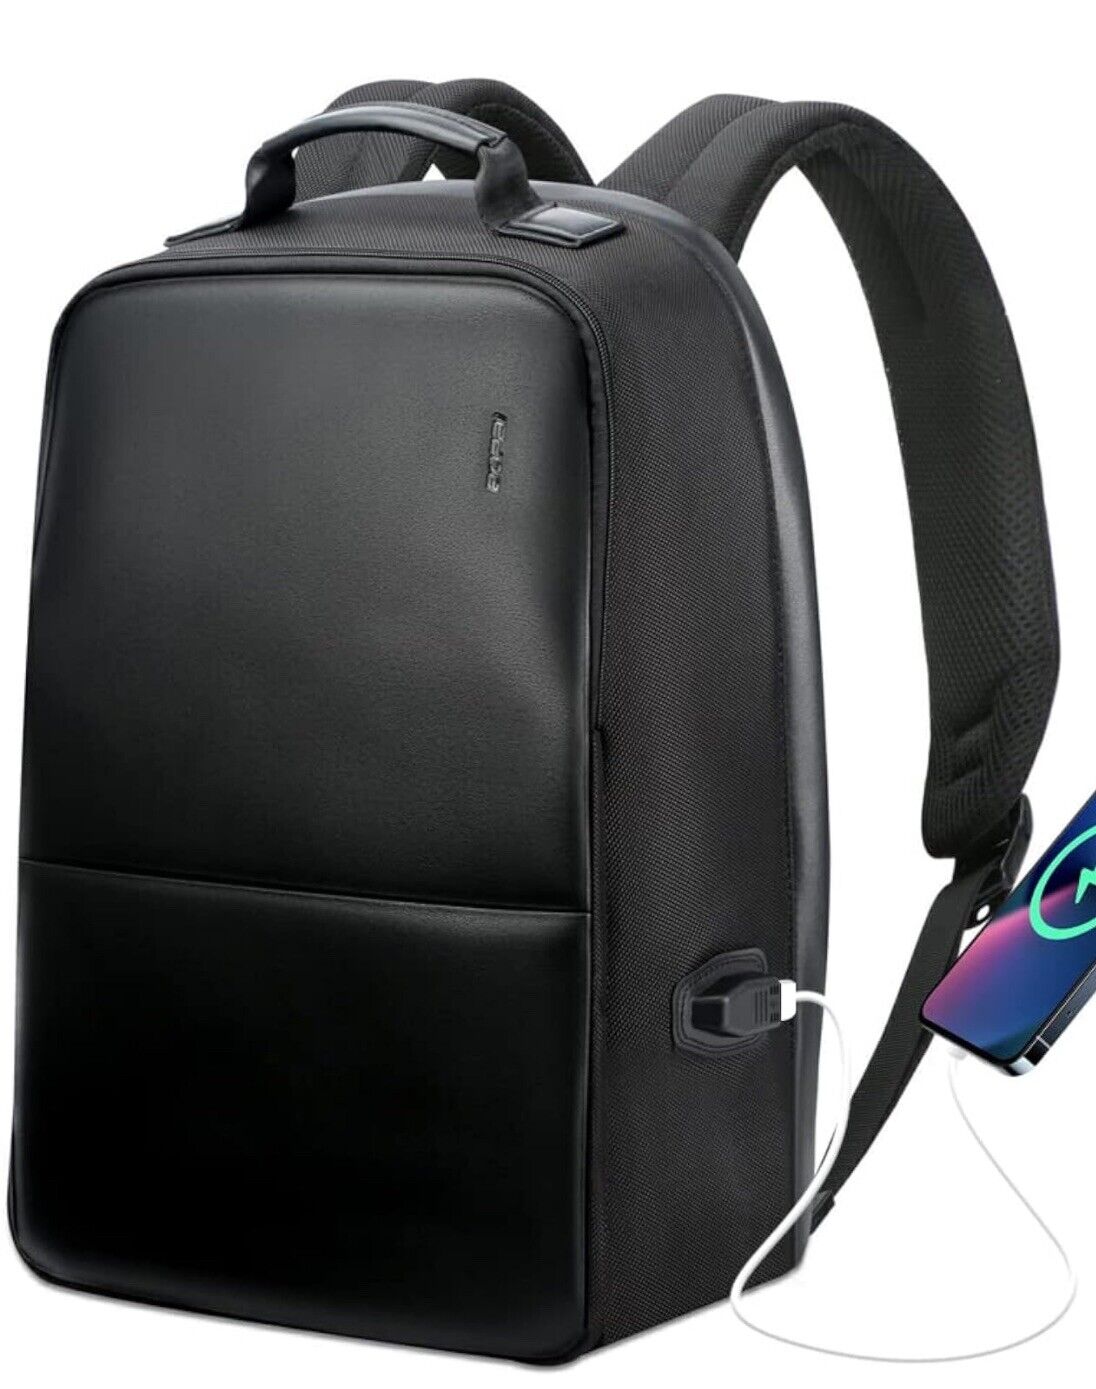 BOPAI Anti-Theft Executive Business Professional Backpack